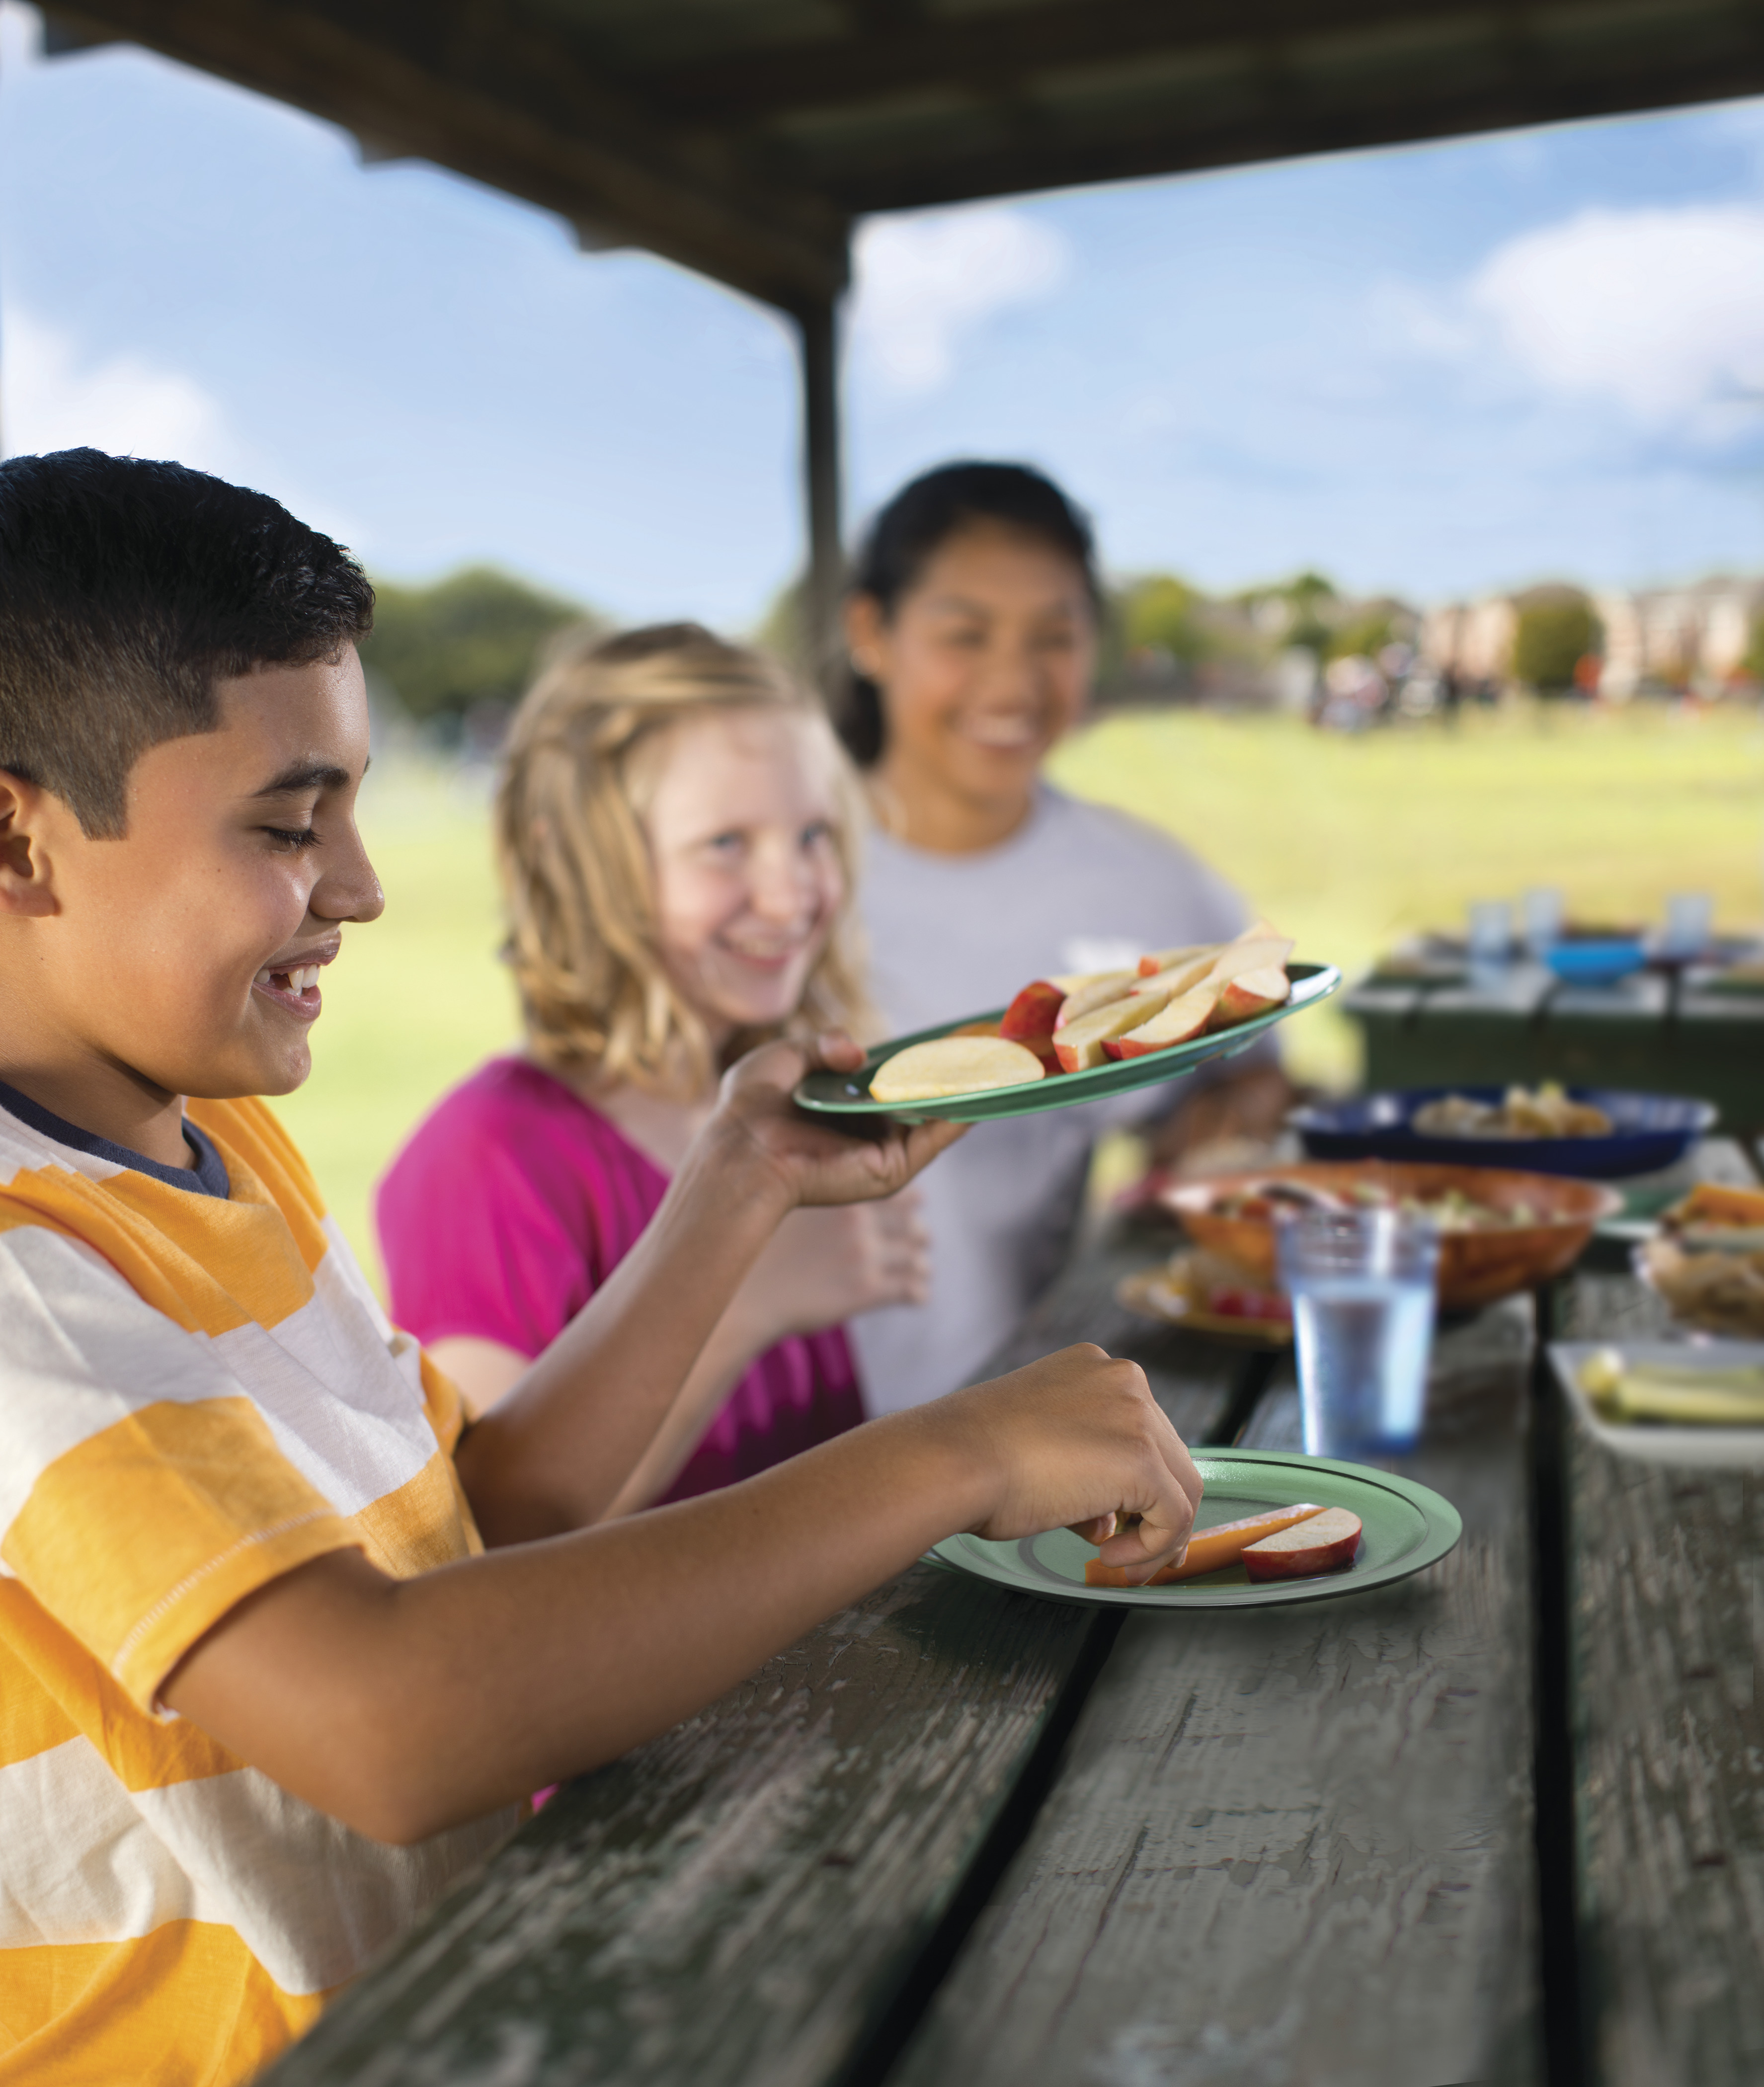 Kids eating snacks at a picnic table